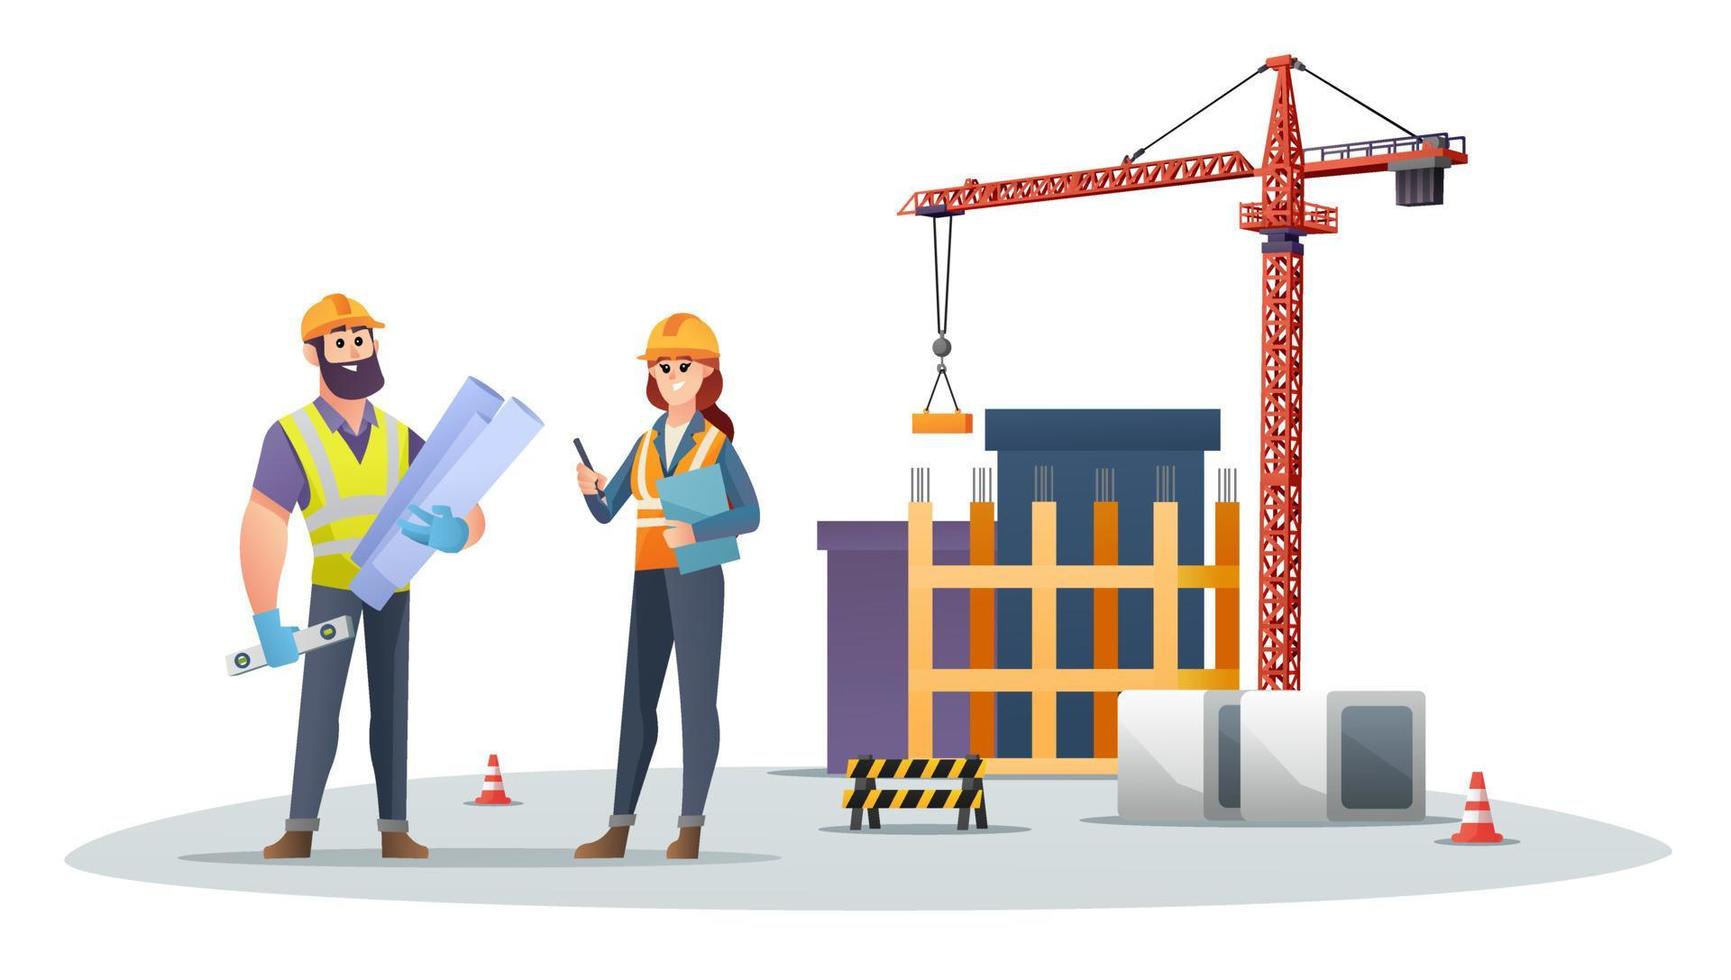 Male and female construction engineer characters on construction site with tower crane illustration vector